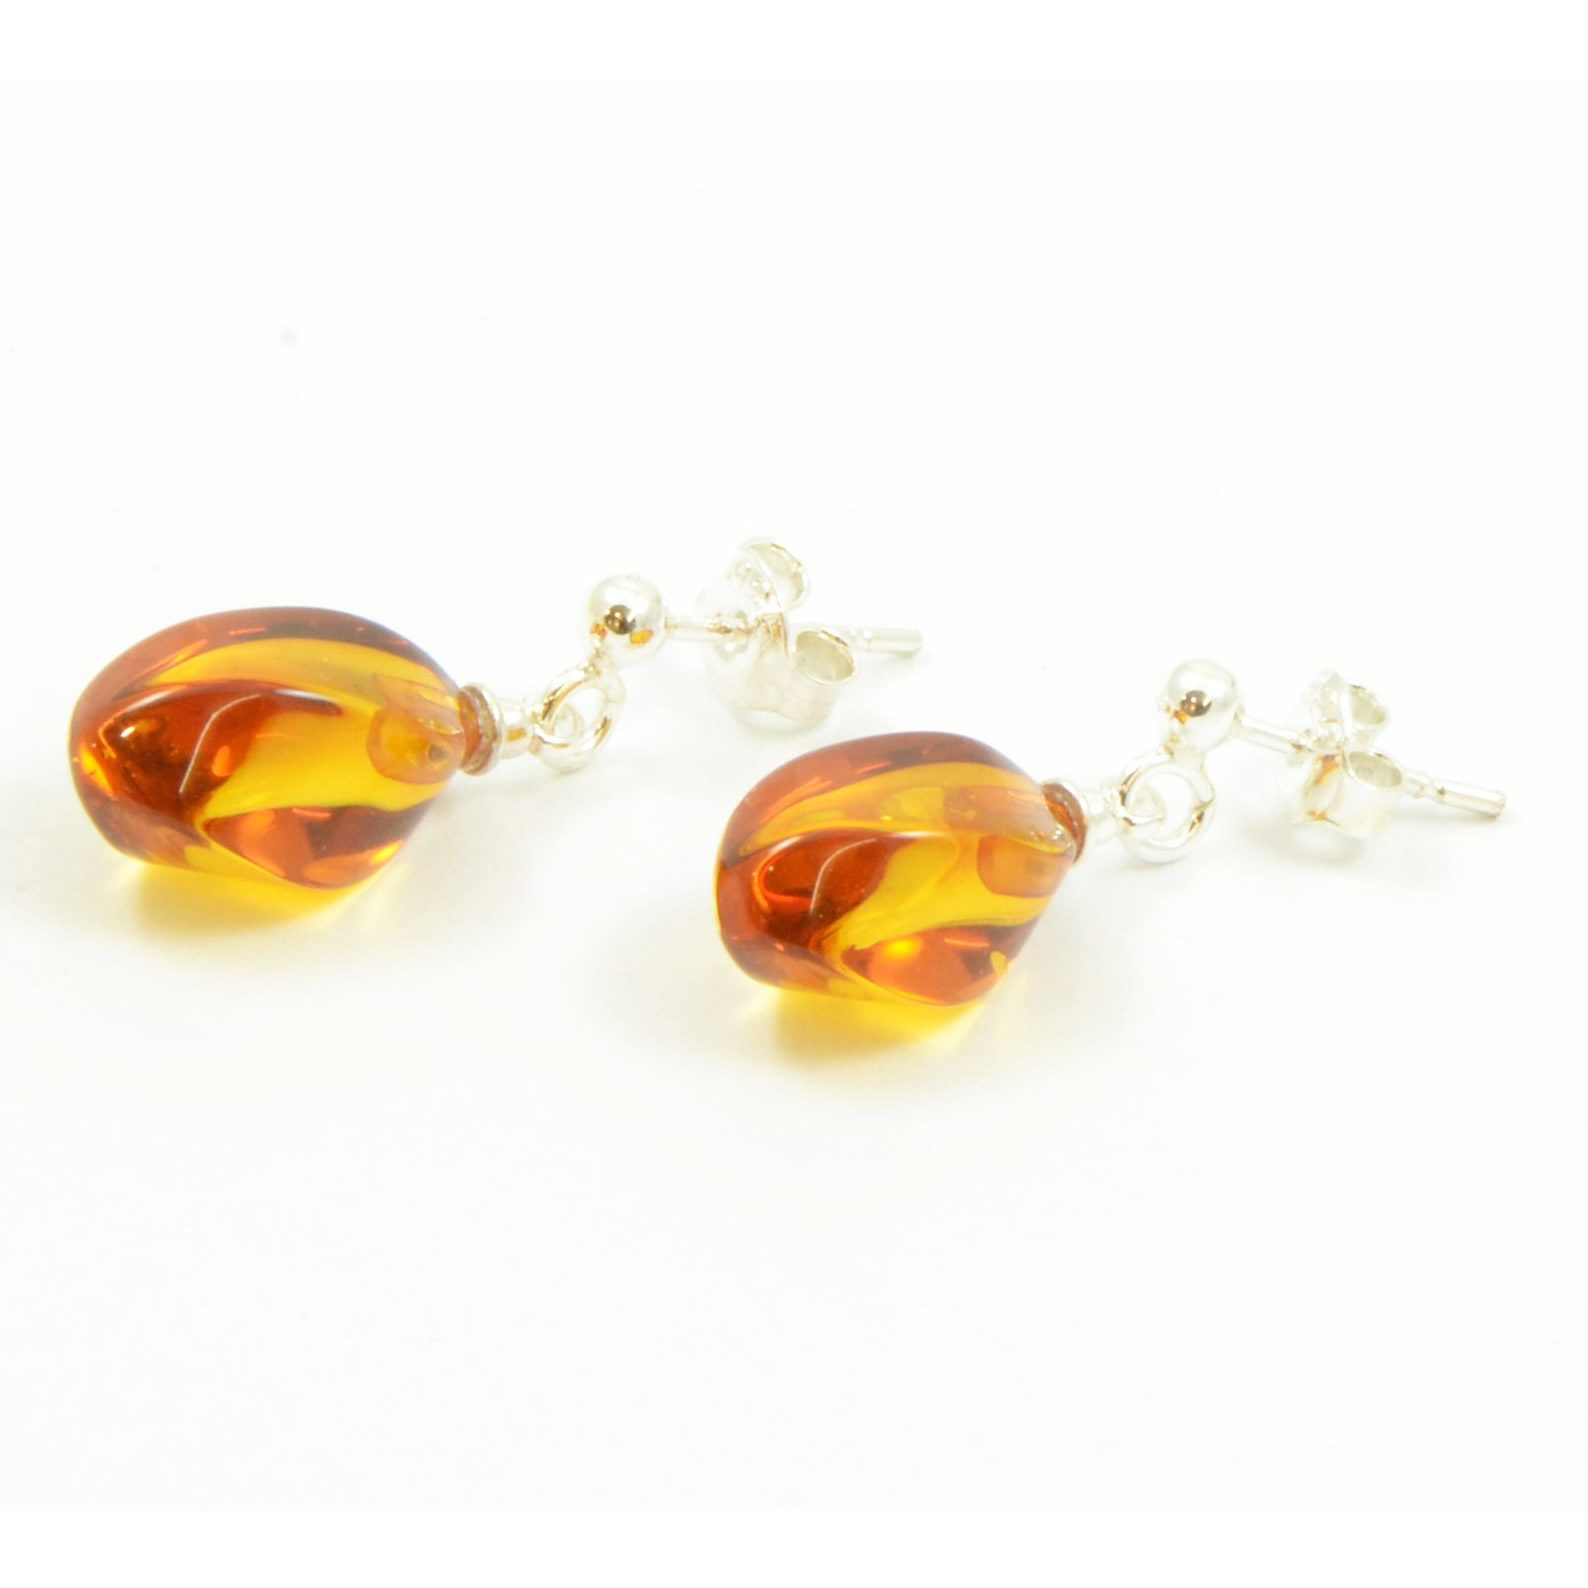 Twisted Amber Drop Earrings with Sterling Silver